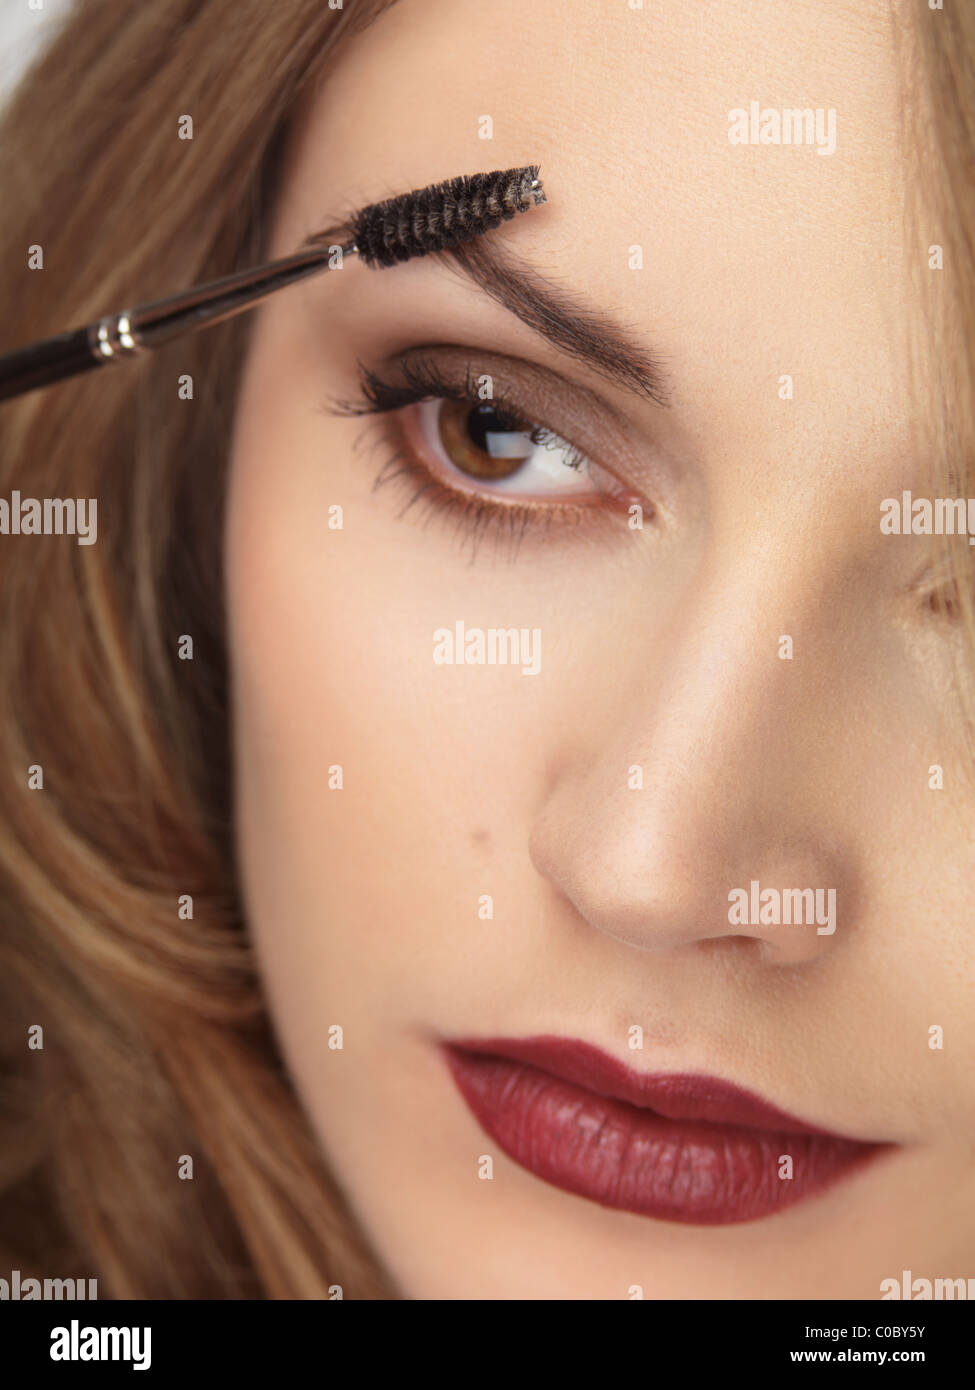 License available at MaximImages.com - Closeup of a woman's face with makeup being applied to her eyebrows Stock Photo